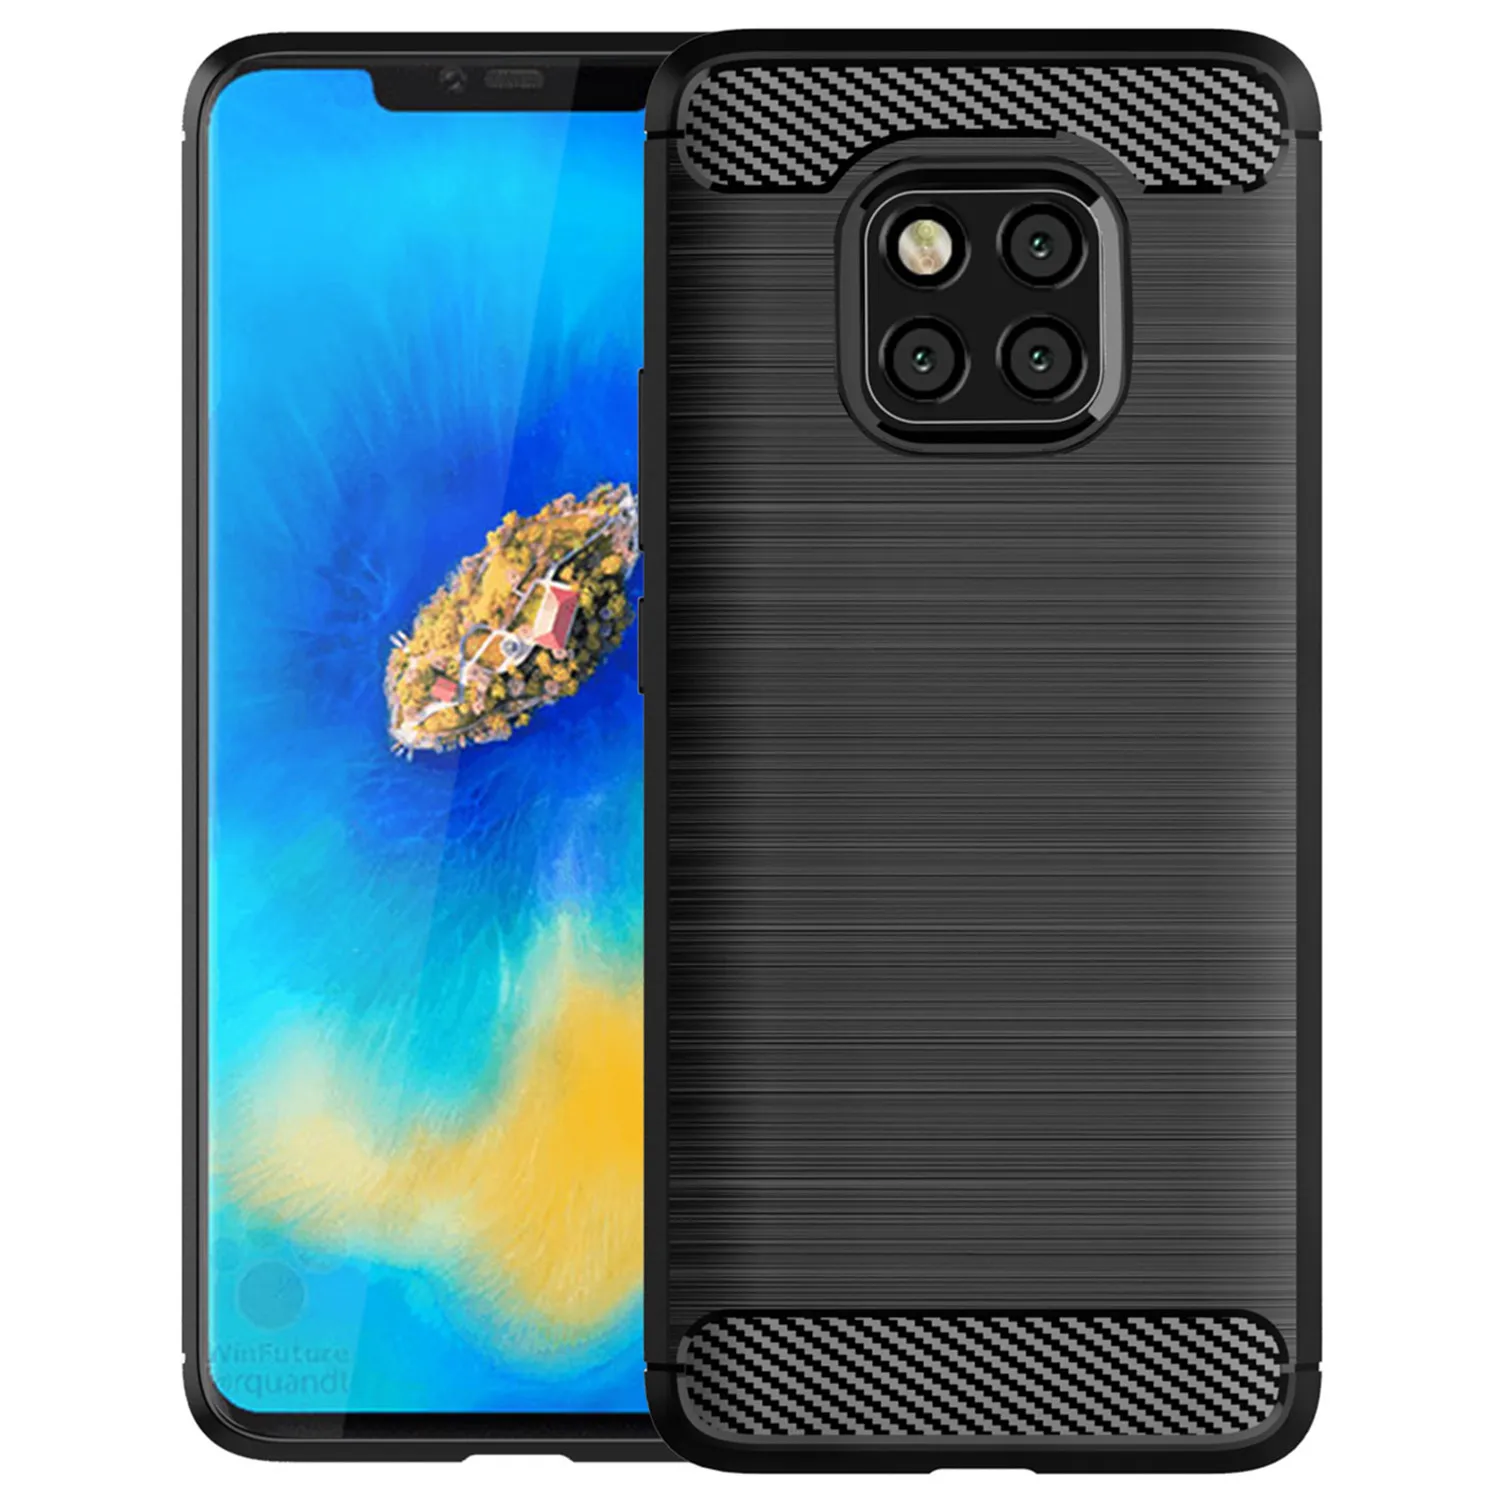 

Soft Silicone Case for Huawei Mate 20Pro 20 lite 20x 20rs ShockProof Phone Cover for mate 20 20lite Carbon Fiber Matte Cases